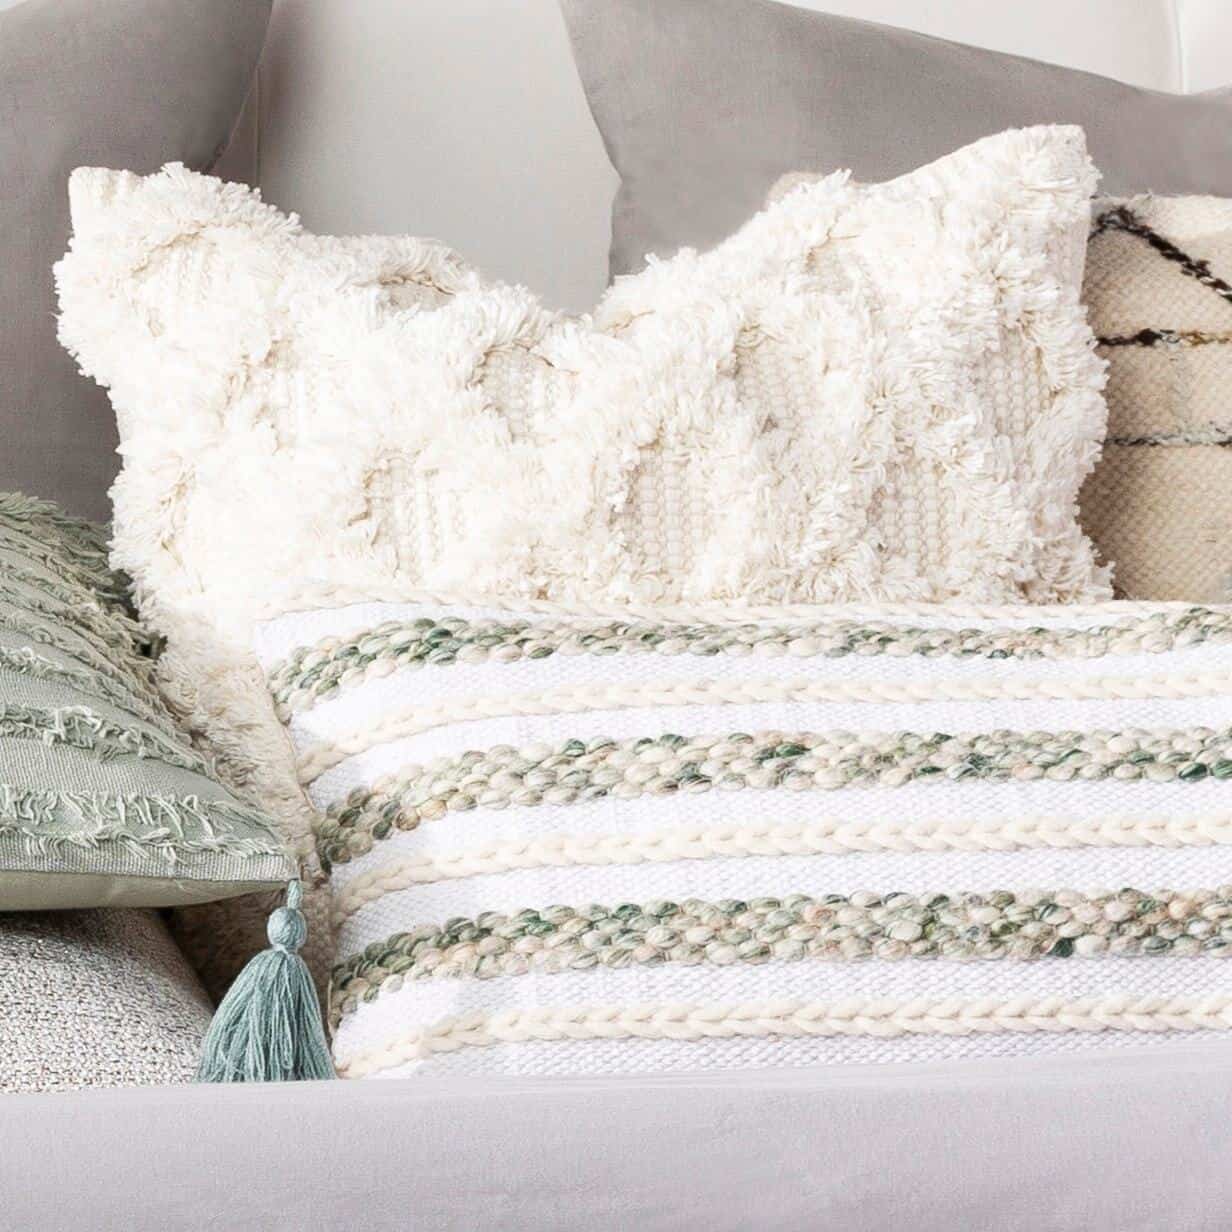 Handwoven Throw Pillows Are Made for Bohemian Rooms